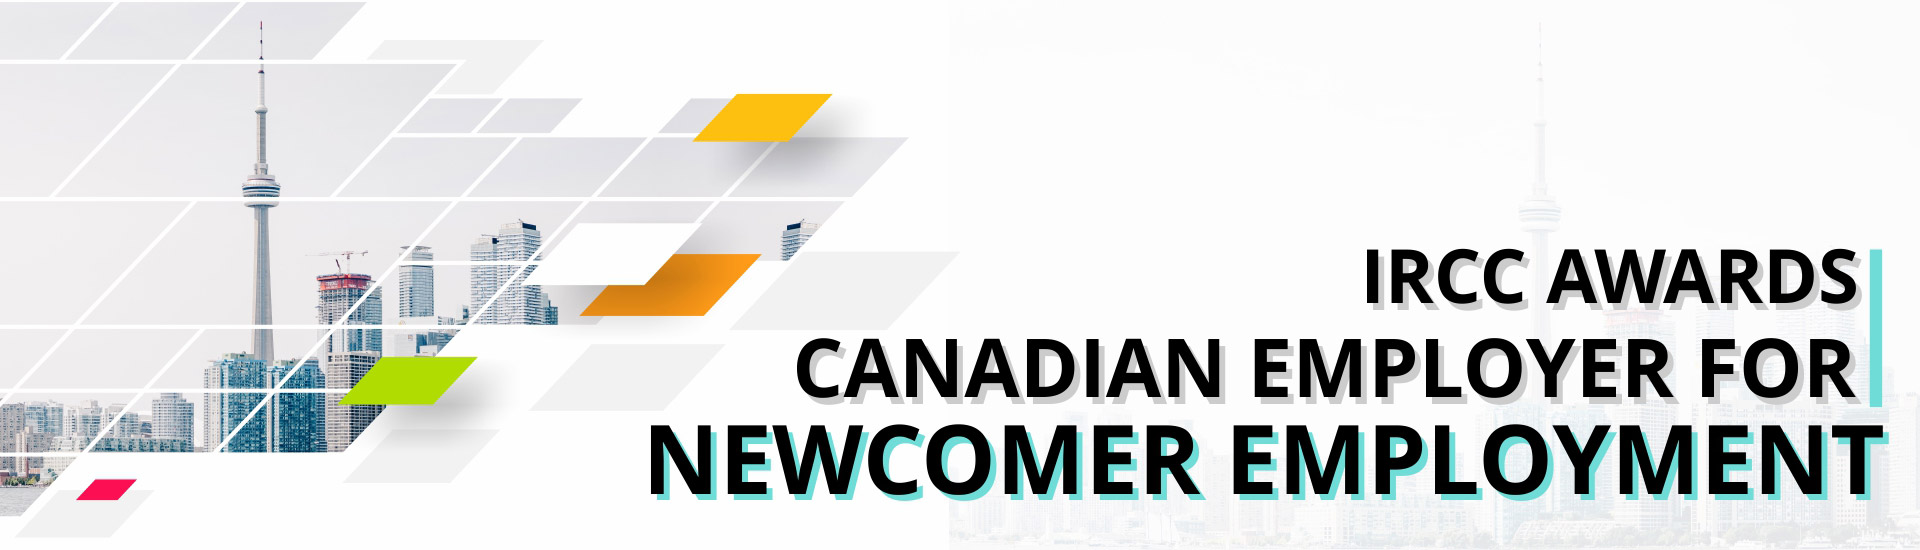 IRCC Awards Canadian Employer for Newcomer Employment